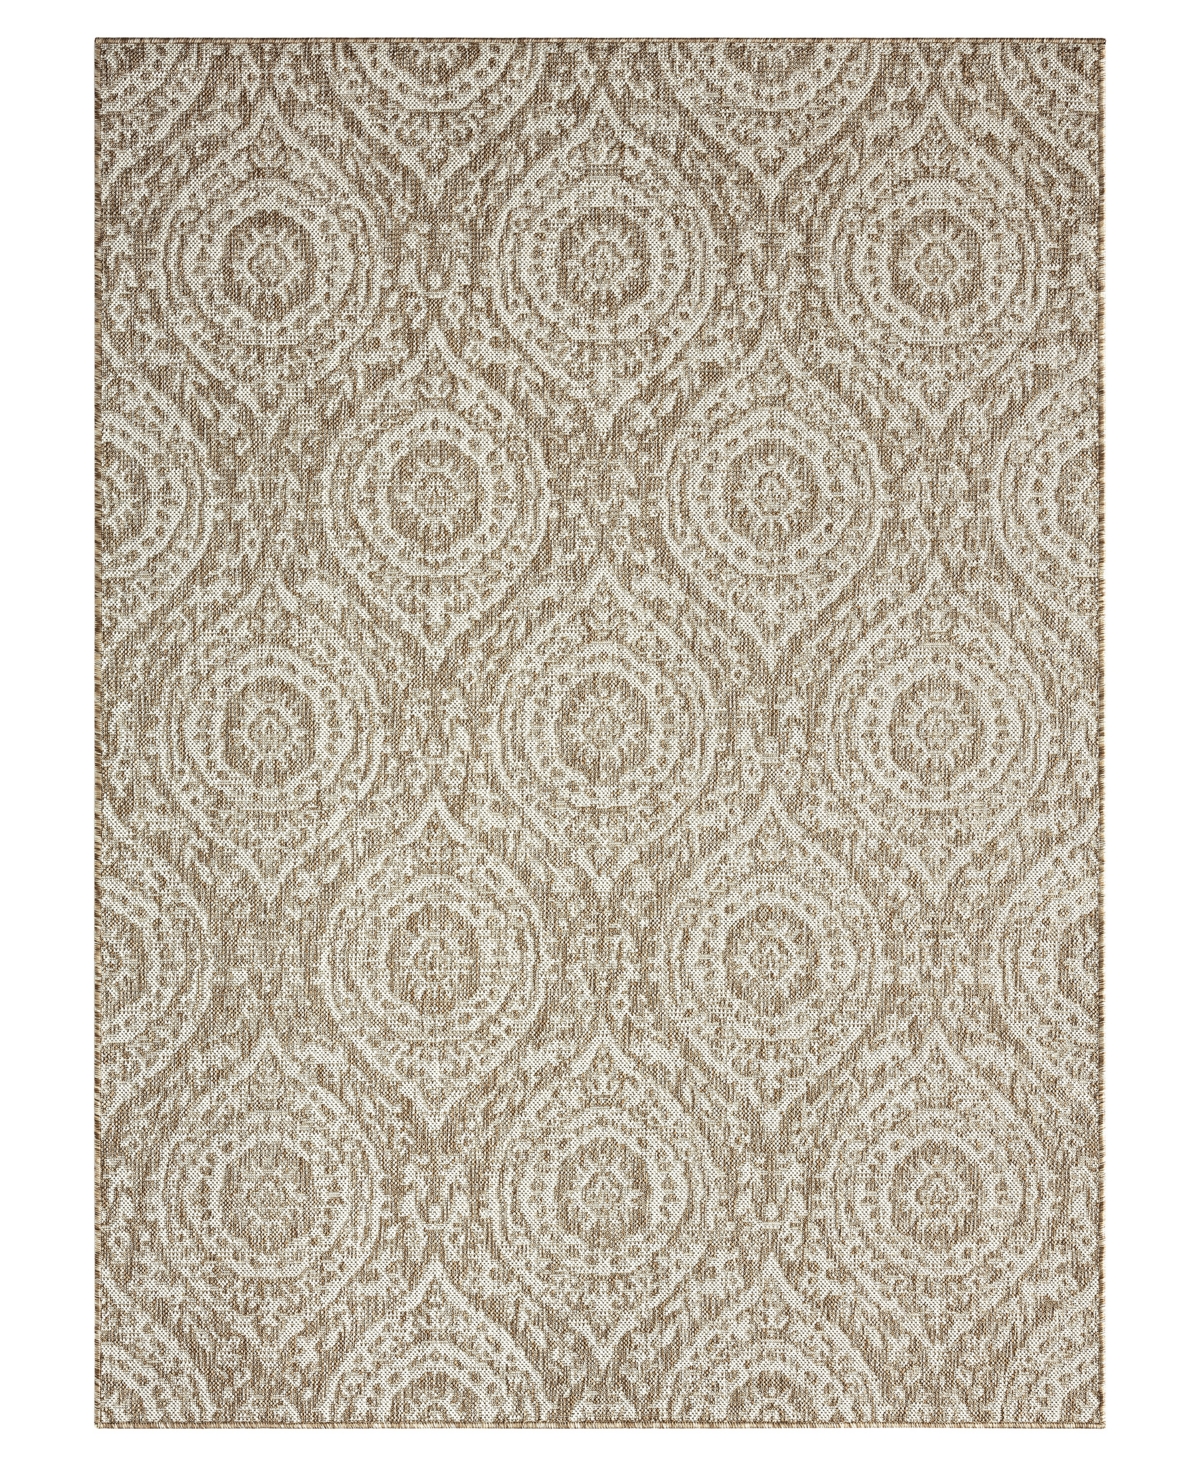 Nicole Miller Patio Country Zoe 5'2" X 7'2" Outdoor Area Rug In Taupe